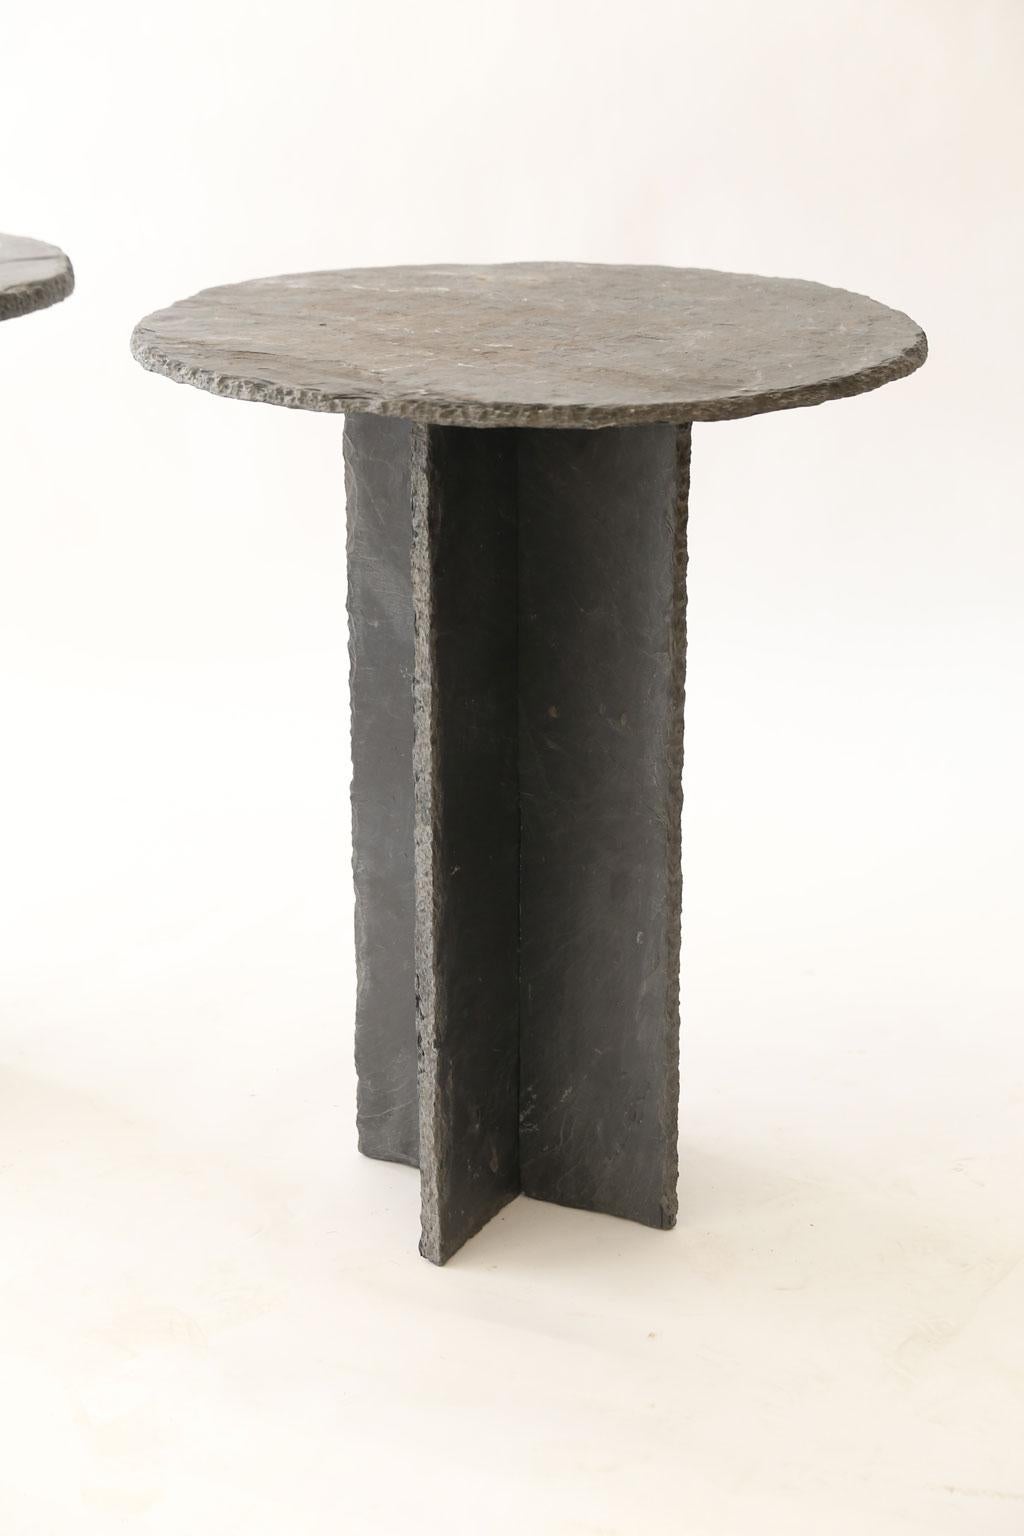 Two French tables d'ardoise, vintage round top slate side tables each with two-piece slate base that crosses and connects in centre.